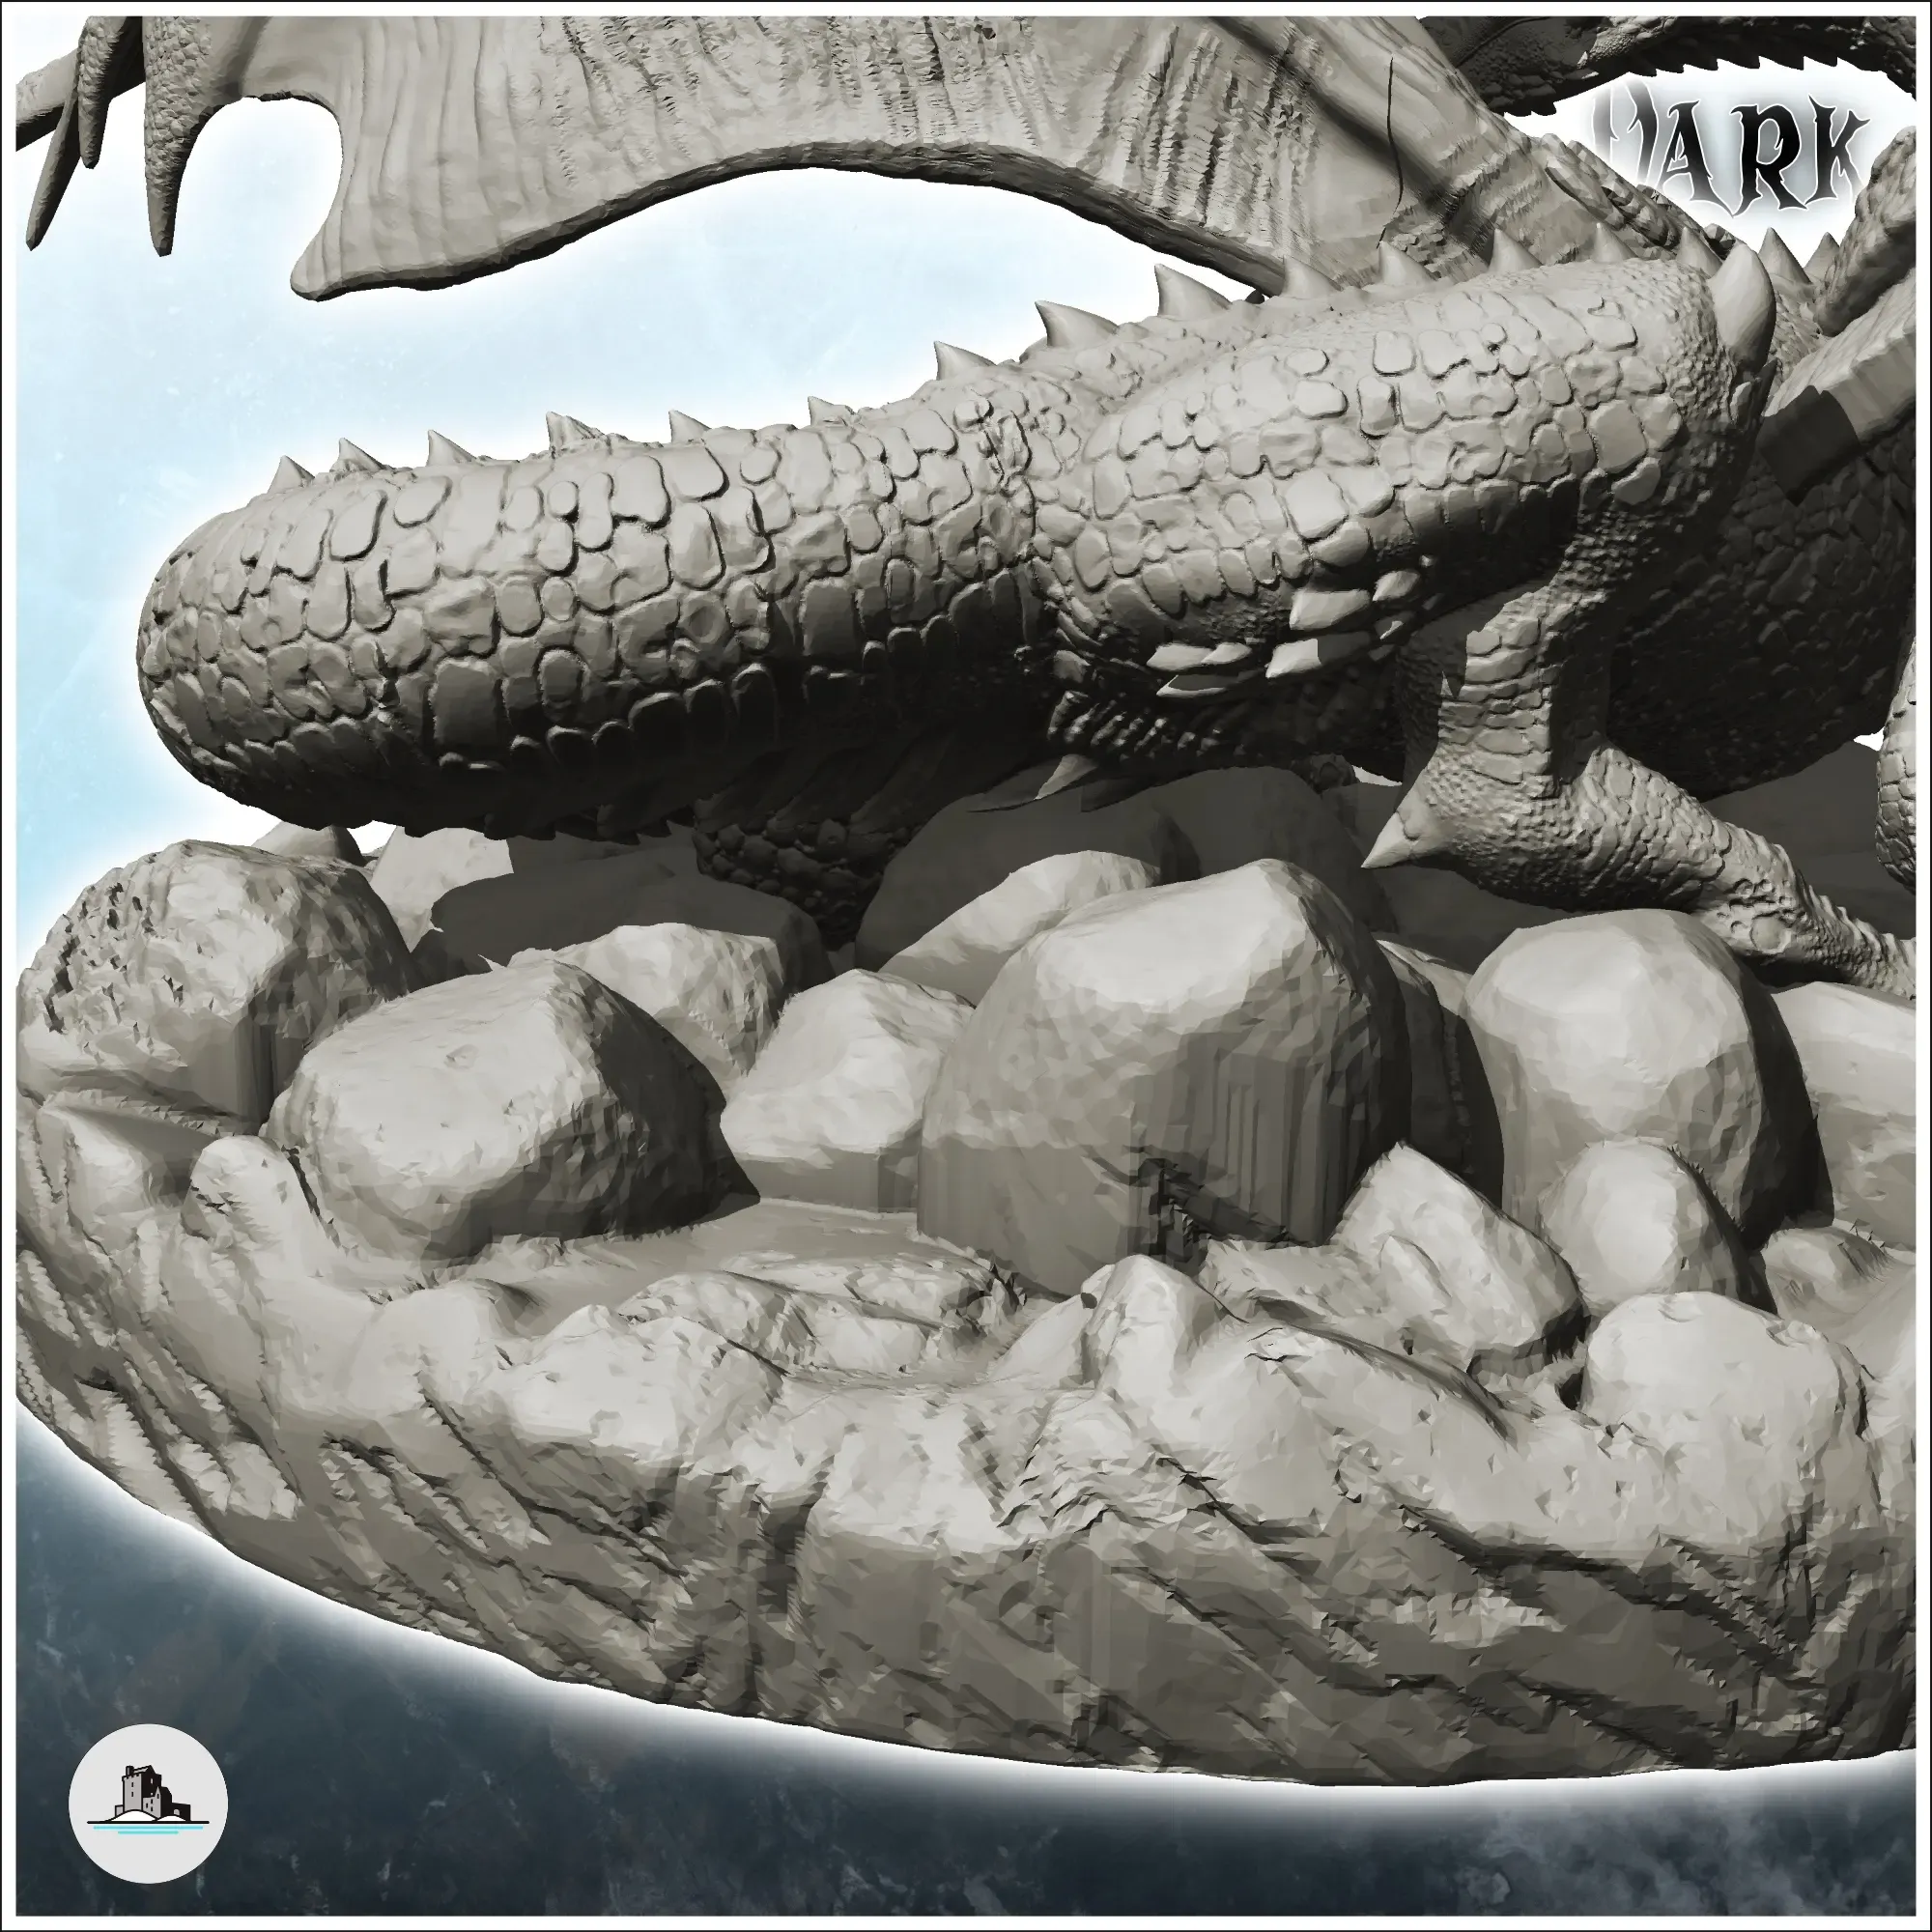 Dragon with big wings protecting his eggs - figure miniature